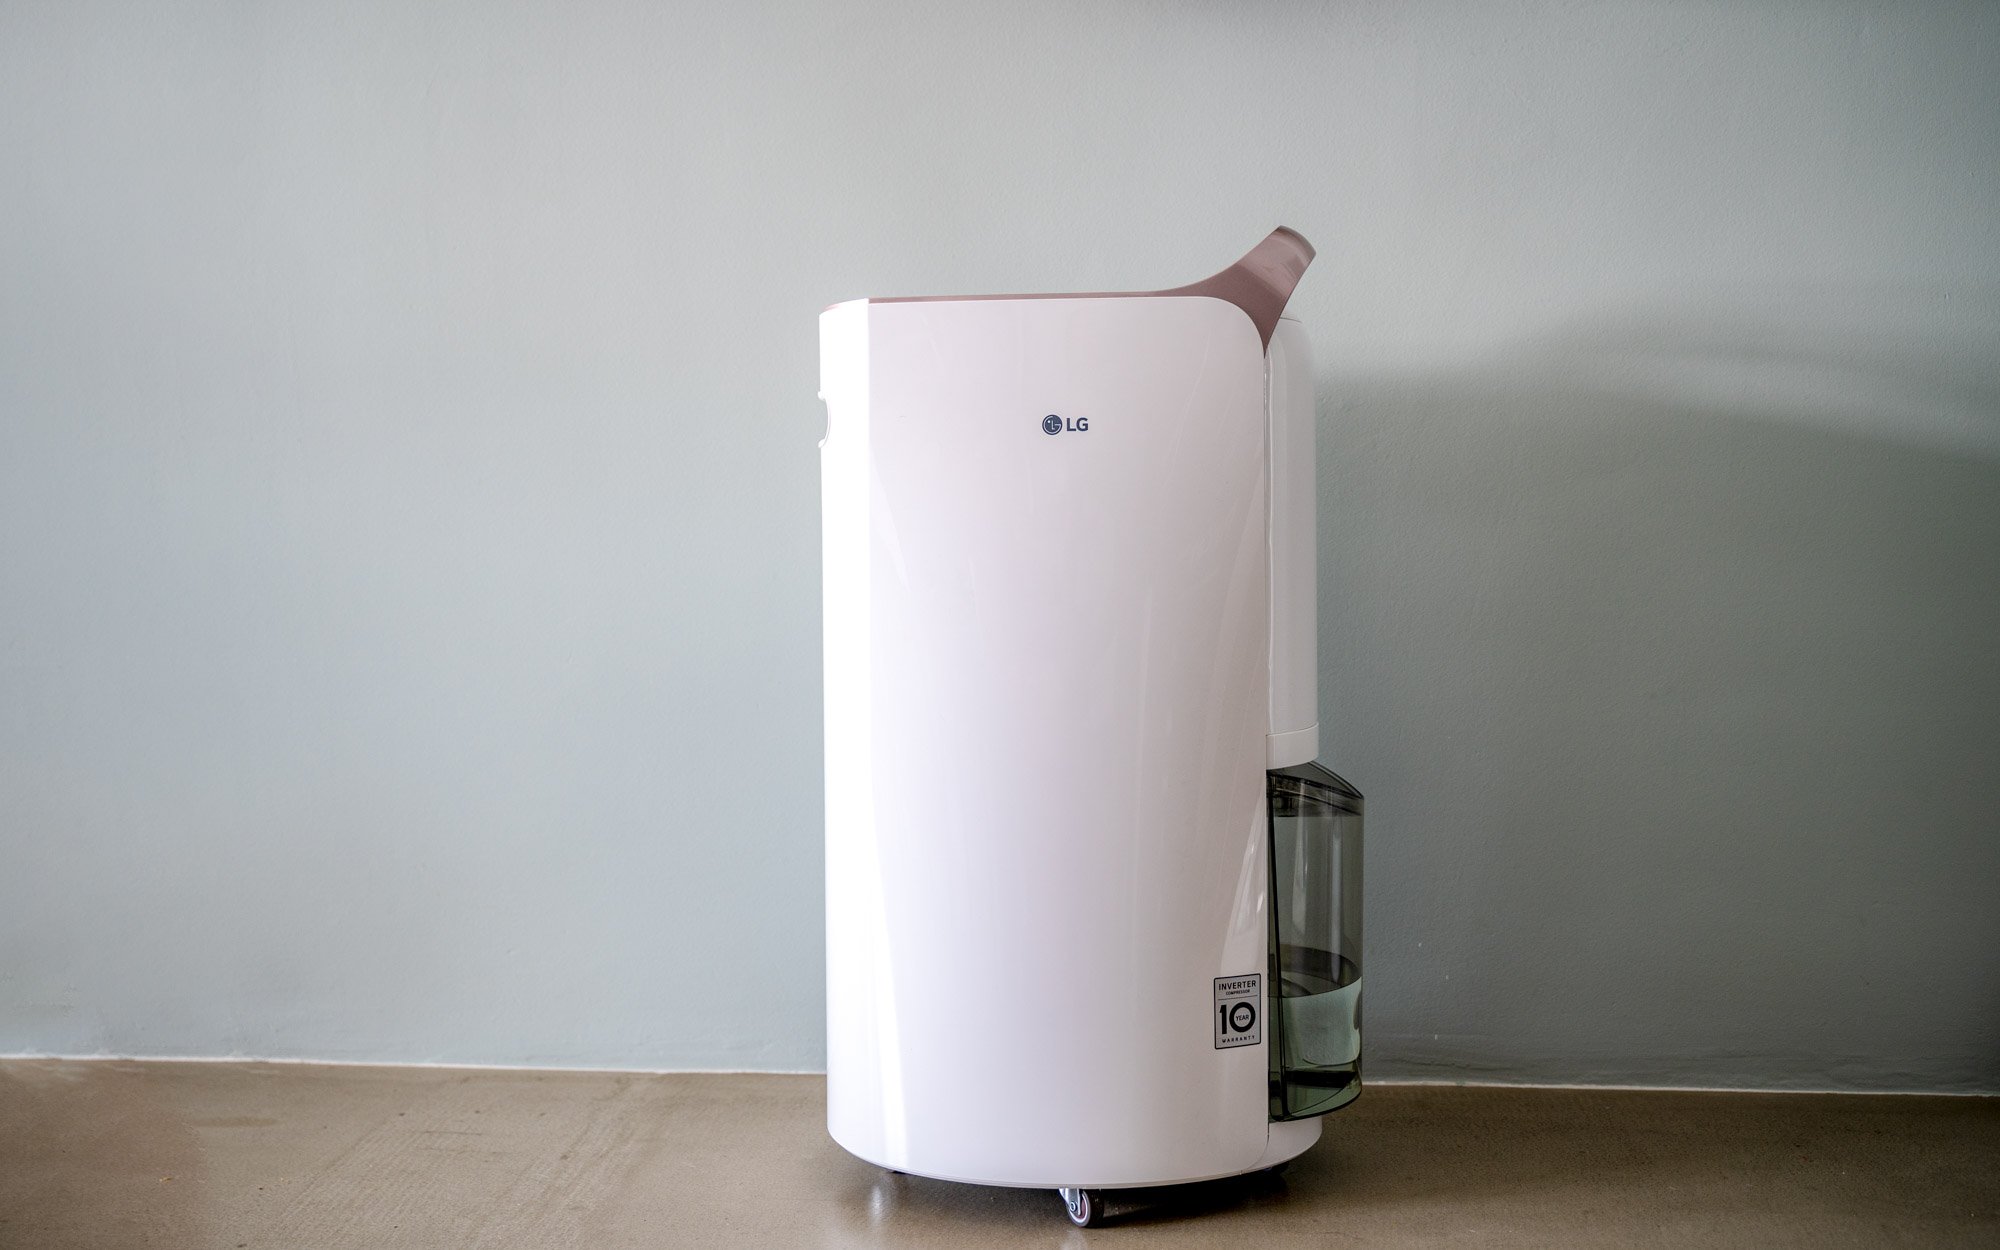 How To Fix The Error Code F1 For LG Dehumidifier